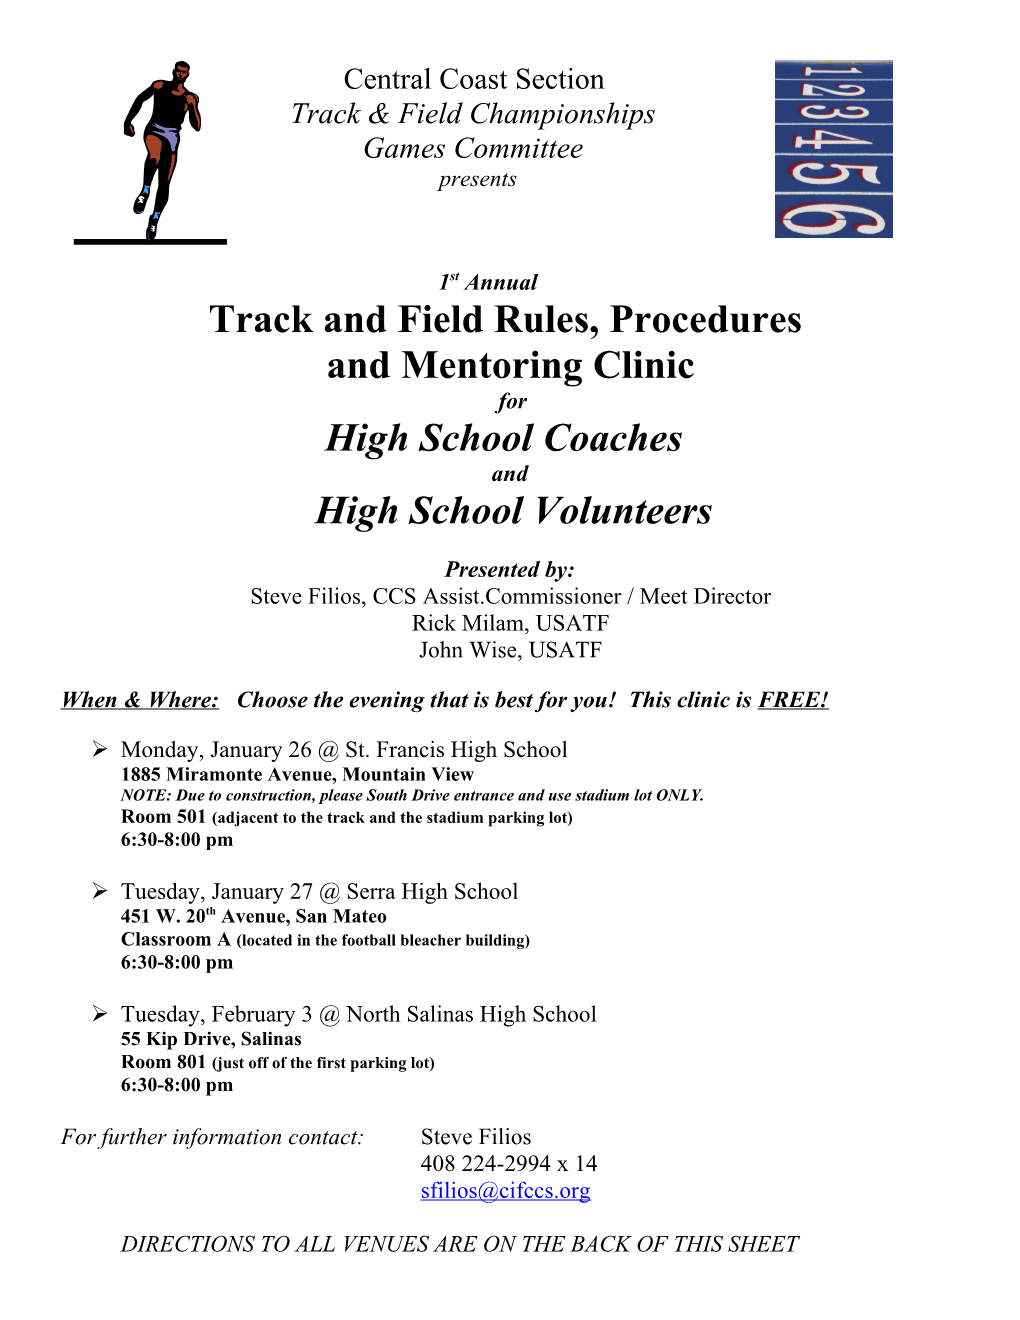 Track and Field Rules, Procedures